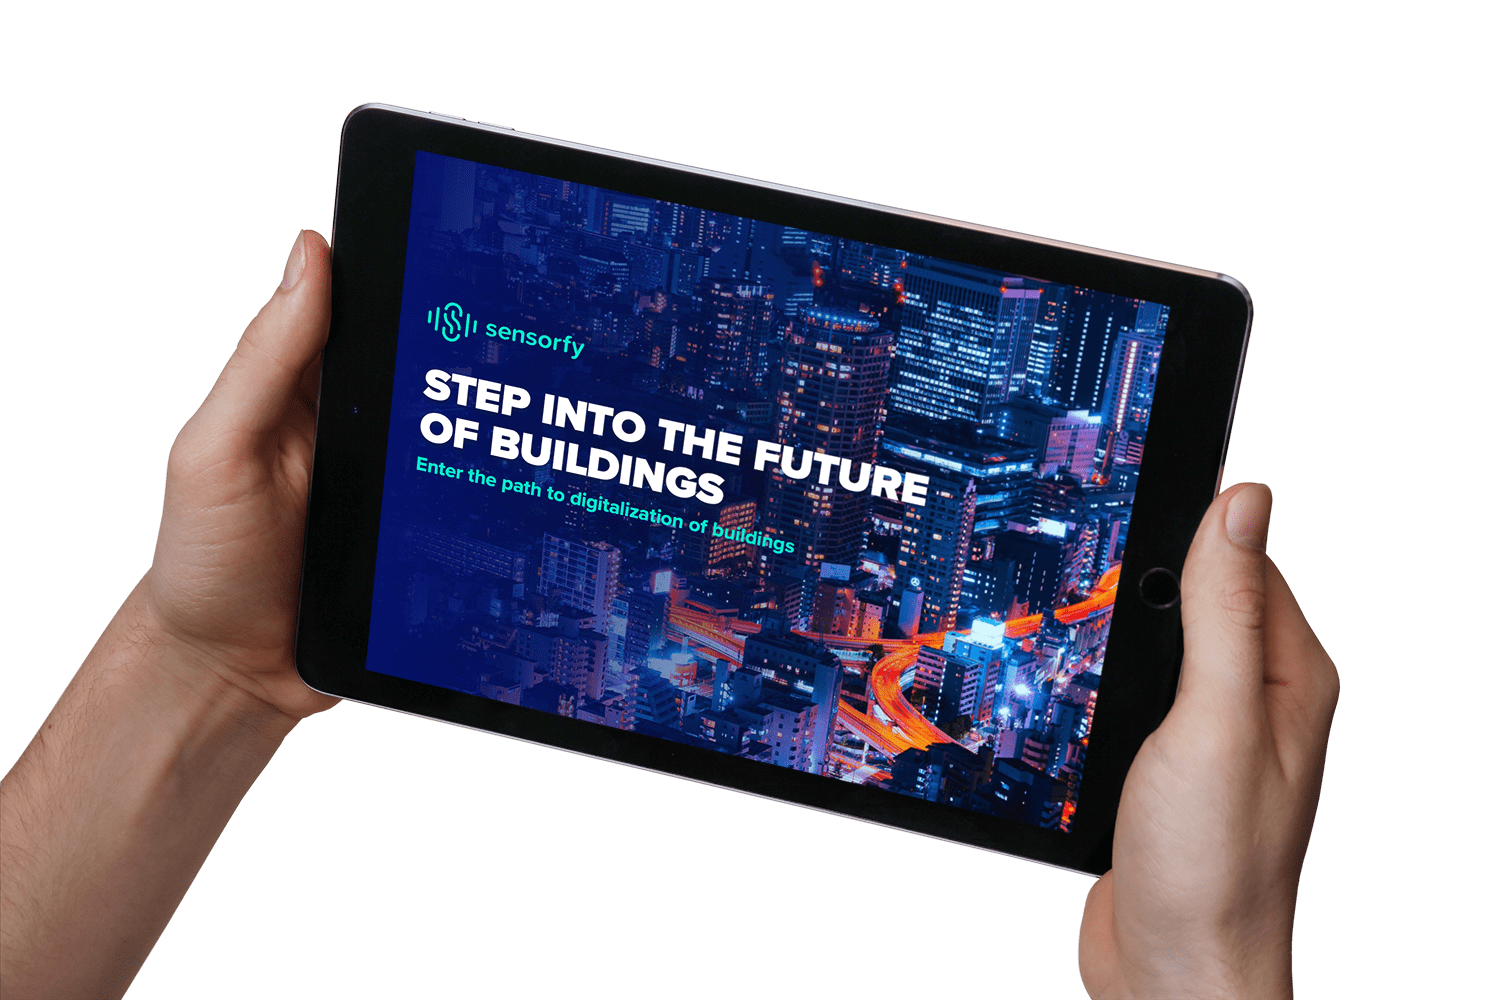 WP Future of buildings_hands holding iPad